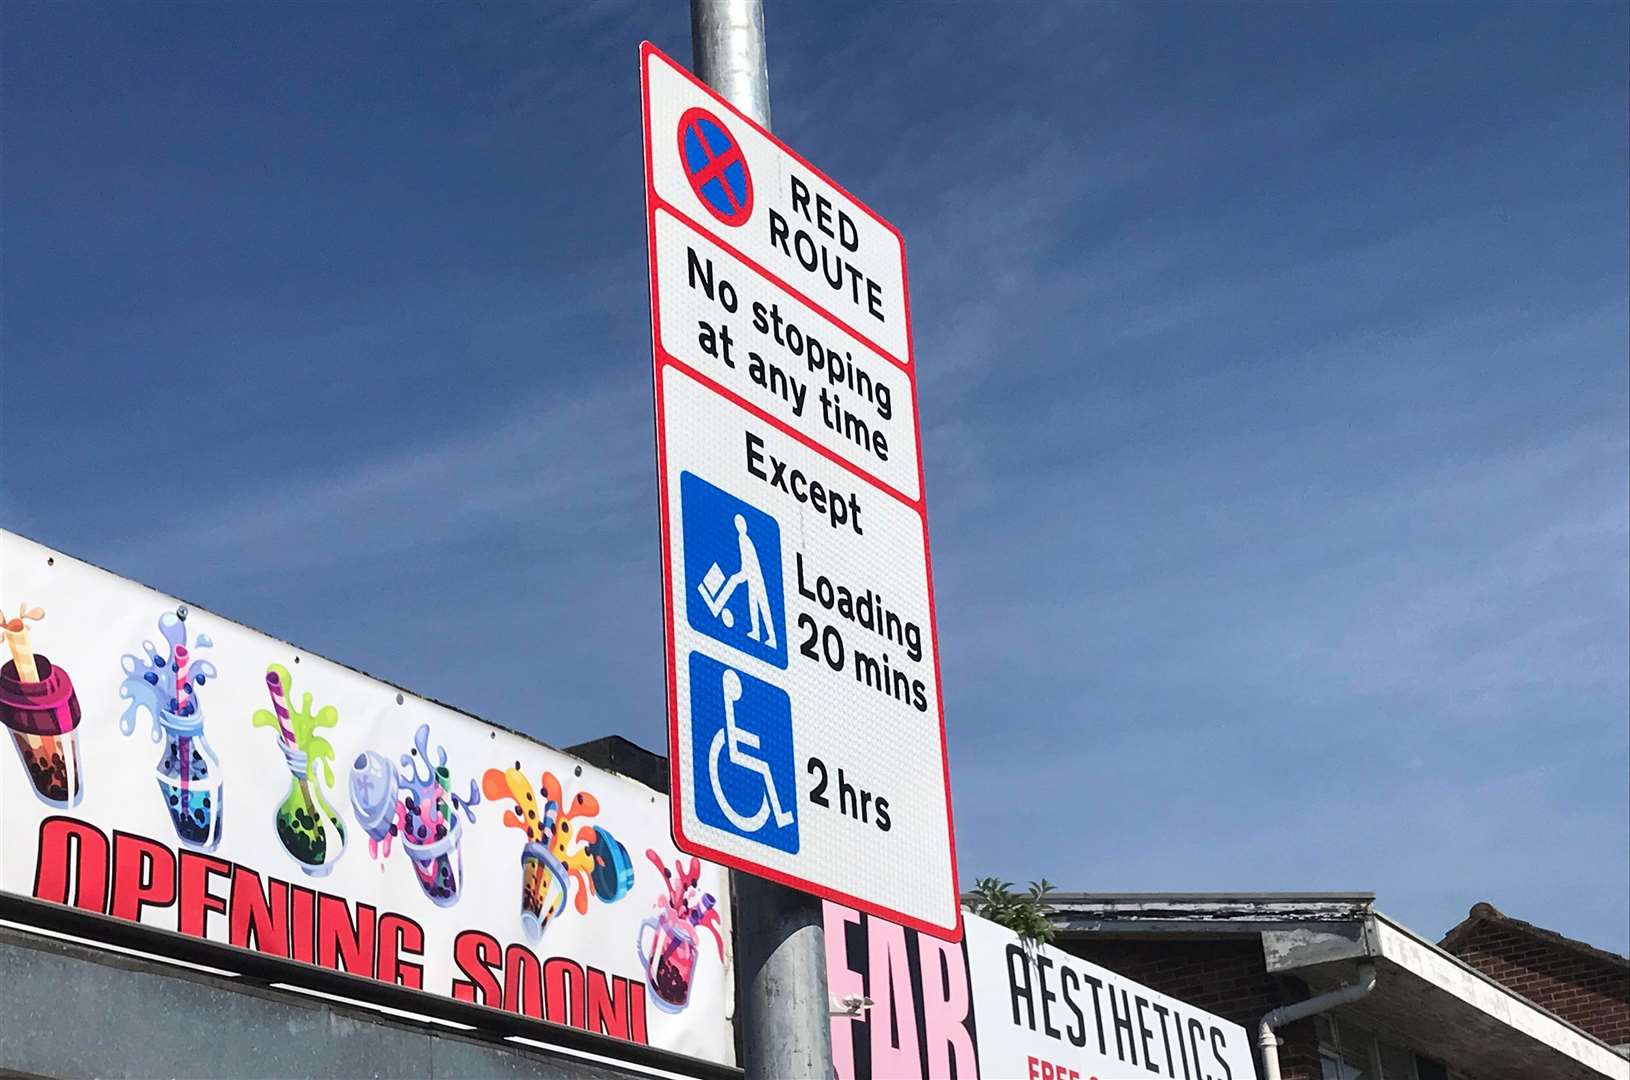 A red route sign in Rainham High Street for one of the loading bays.